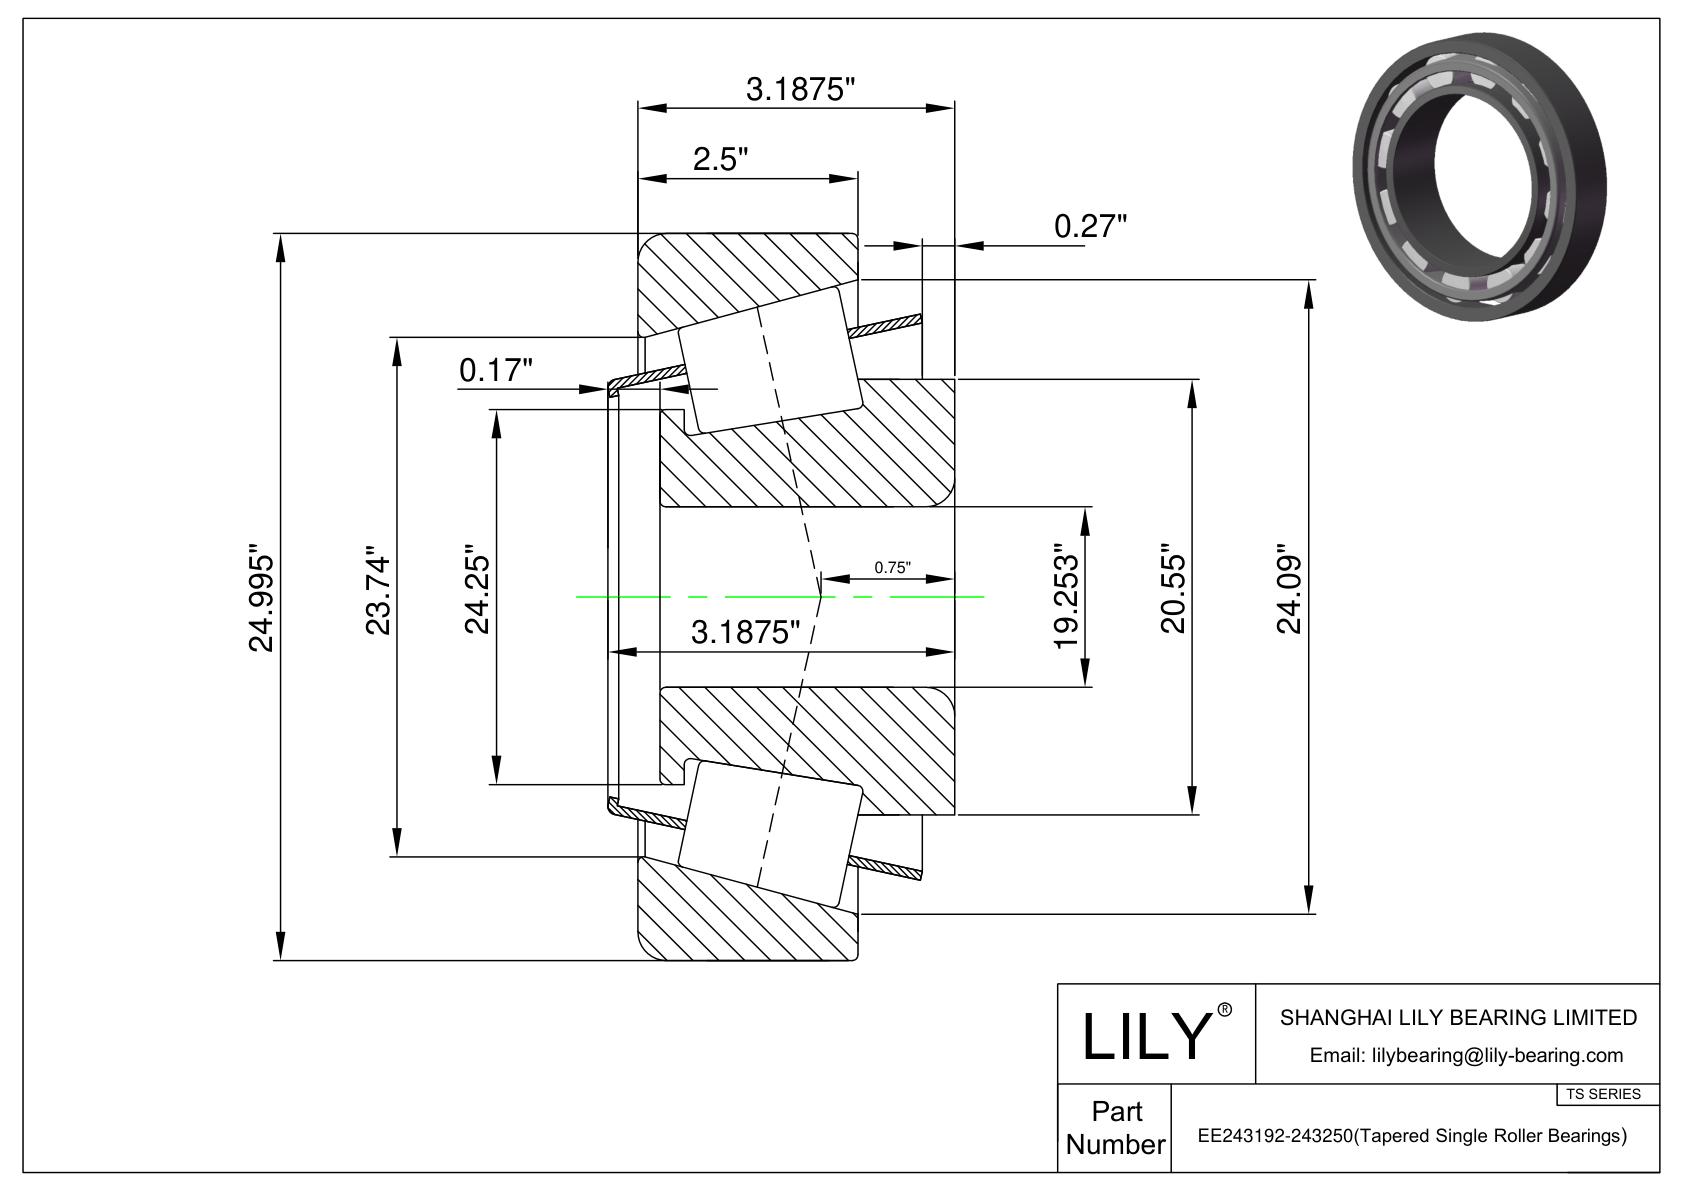 EE243192-243250 TS (Tapered Single Roller Bearings) (Imperial) cad drawing